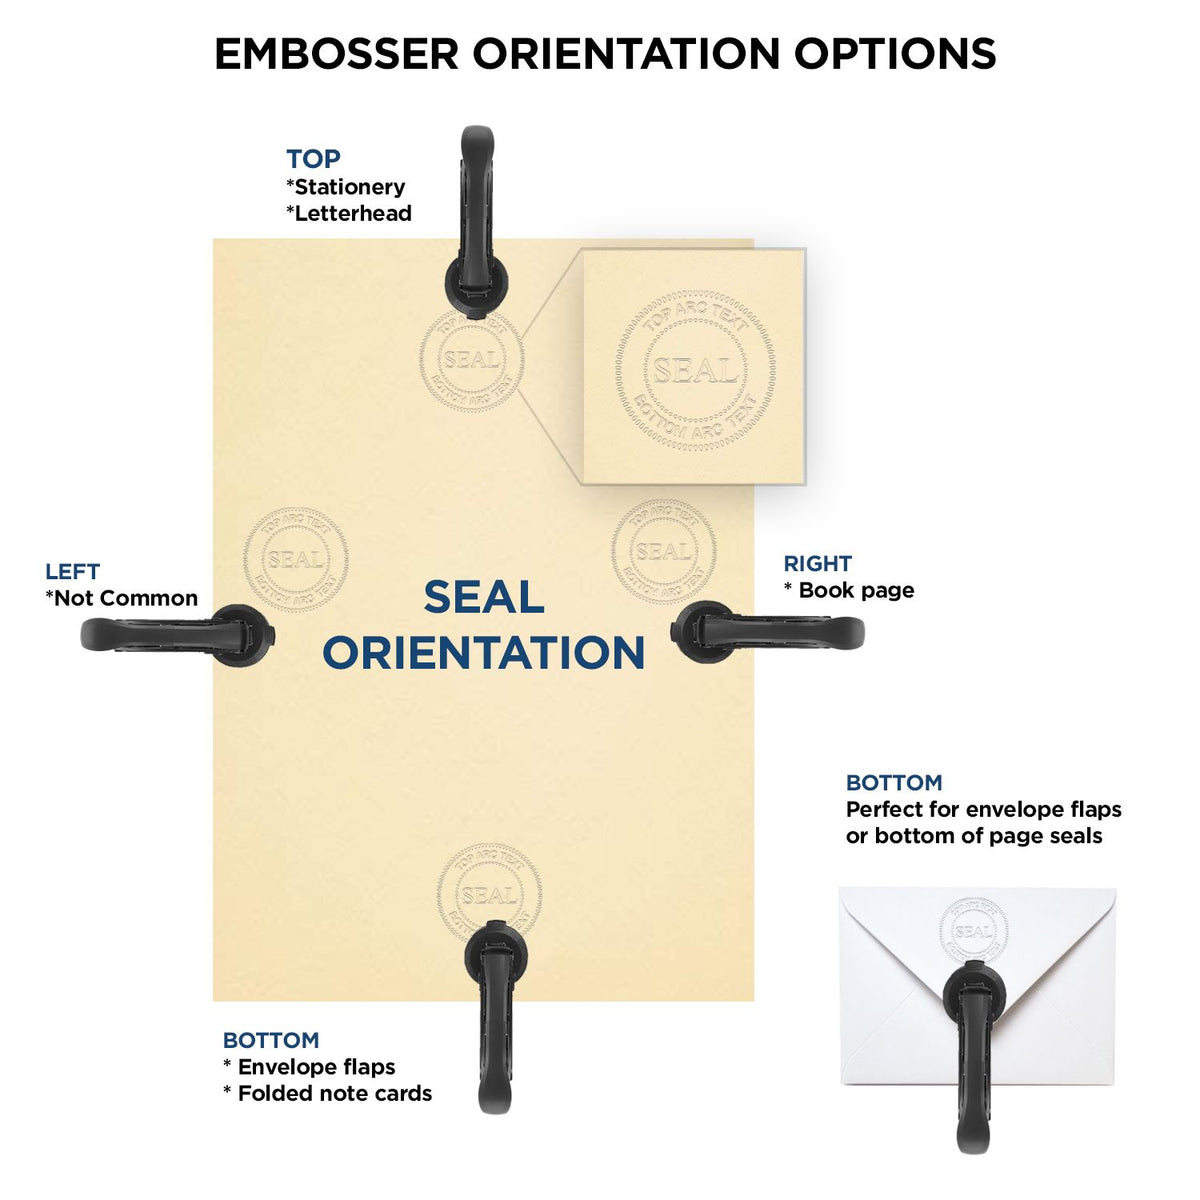 An infographic for the Long Reach Florida Land Surveyor Seal showing embosser orientation, this is showing examples of a top, bottom, right and left insert.